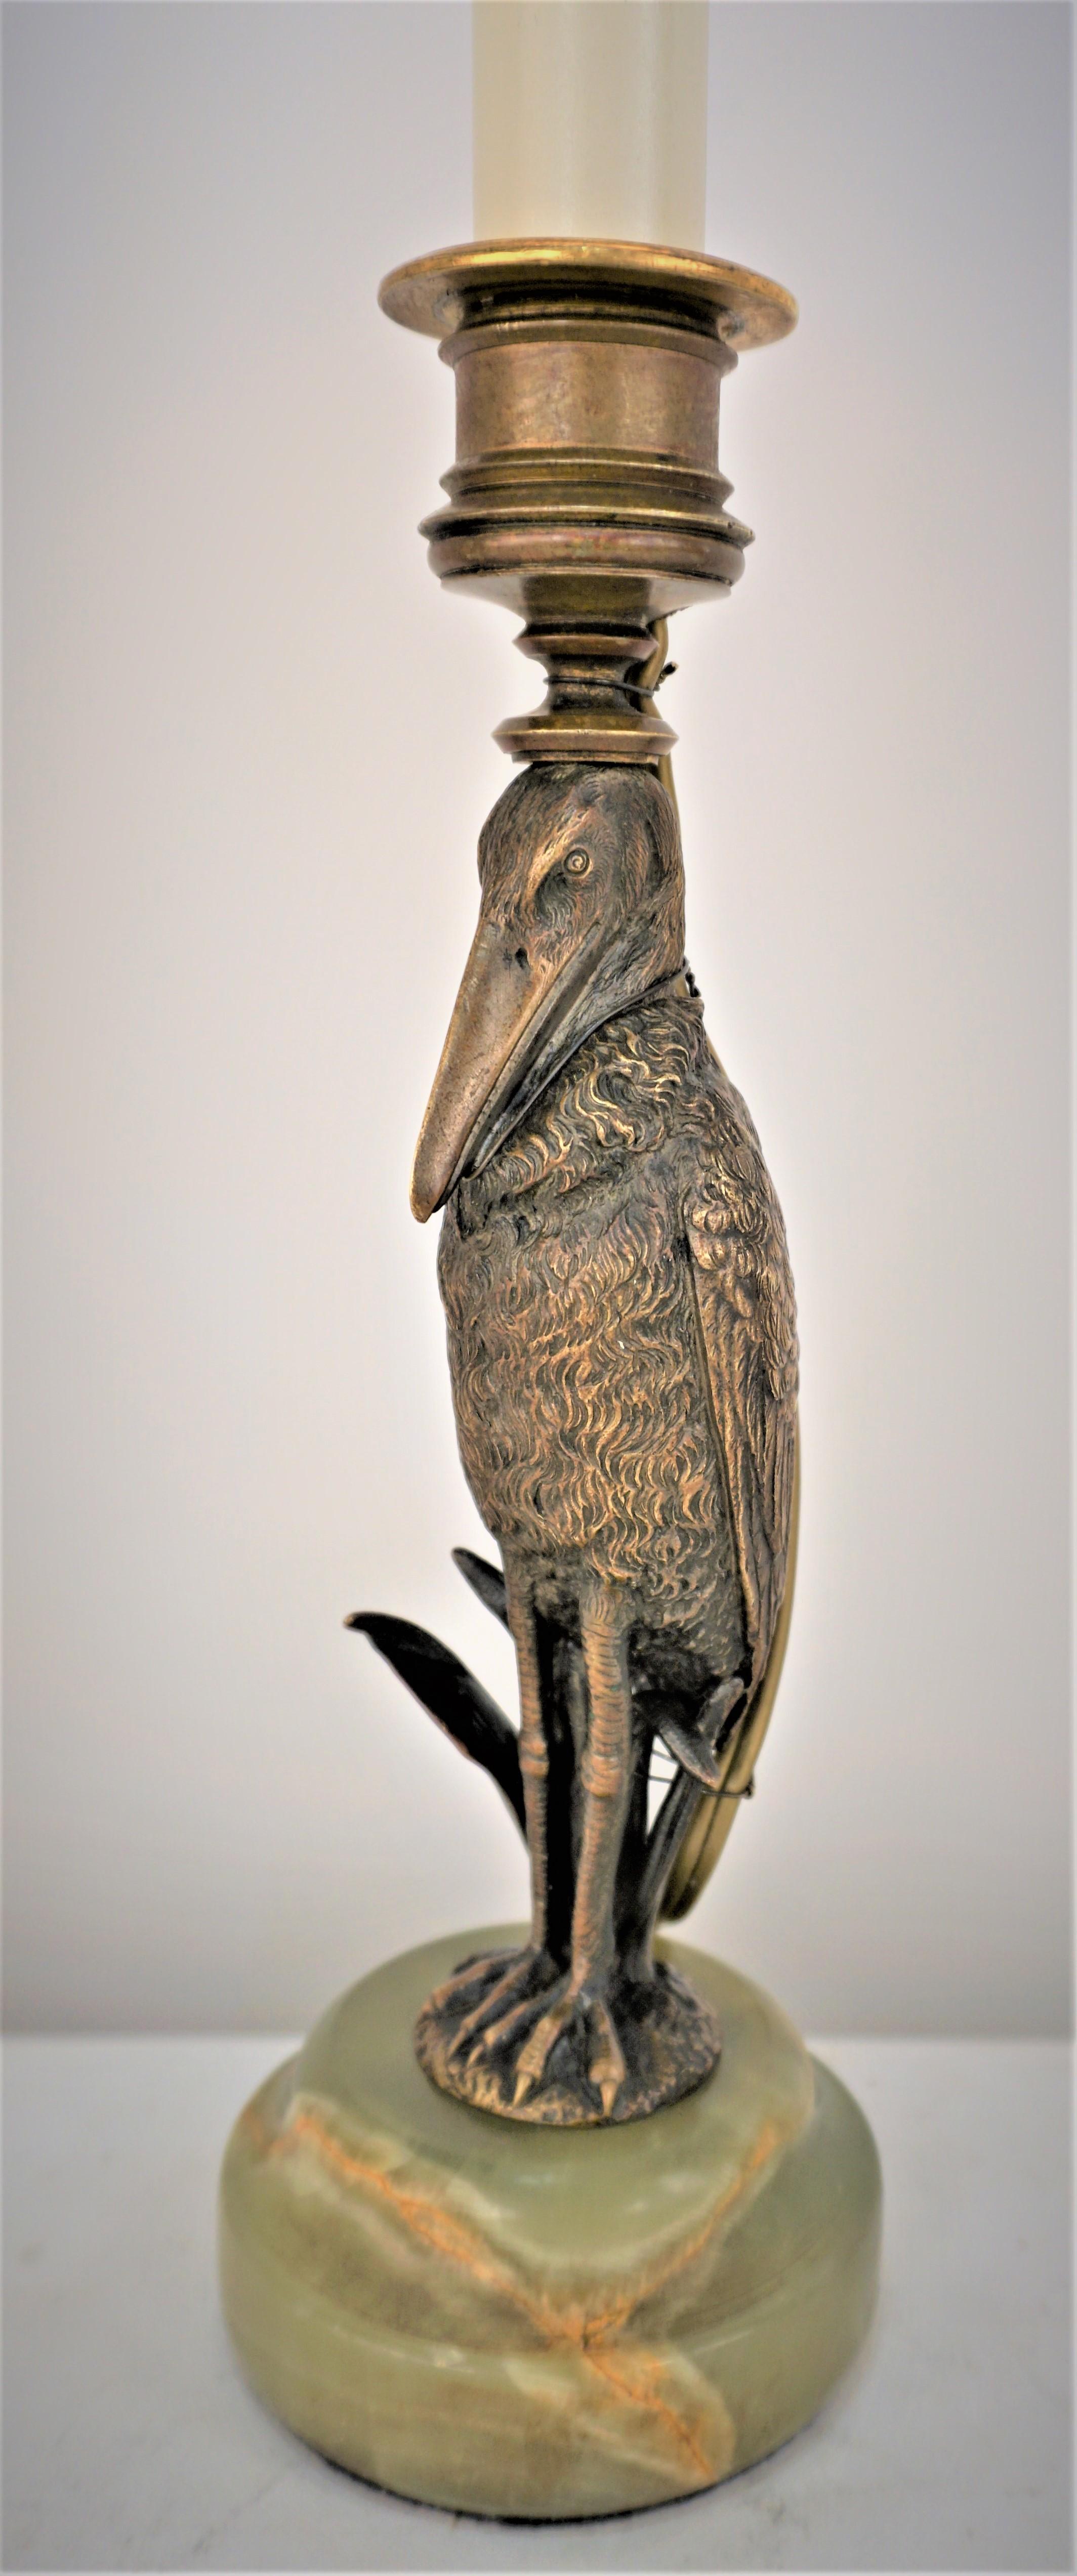 Bronze sculpture pelican standing on round green onyx candlestick that has been electrified and was made to a beautiful table lamp. 